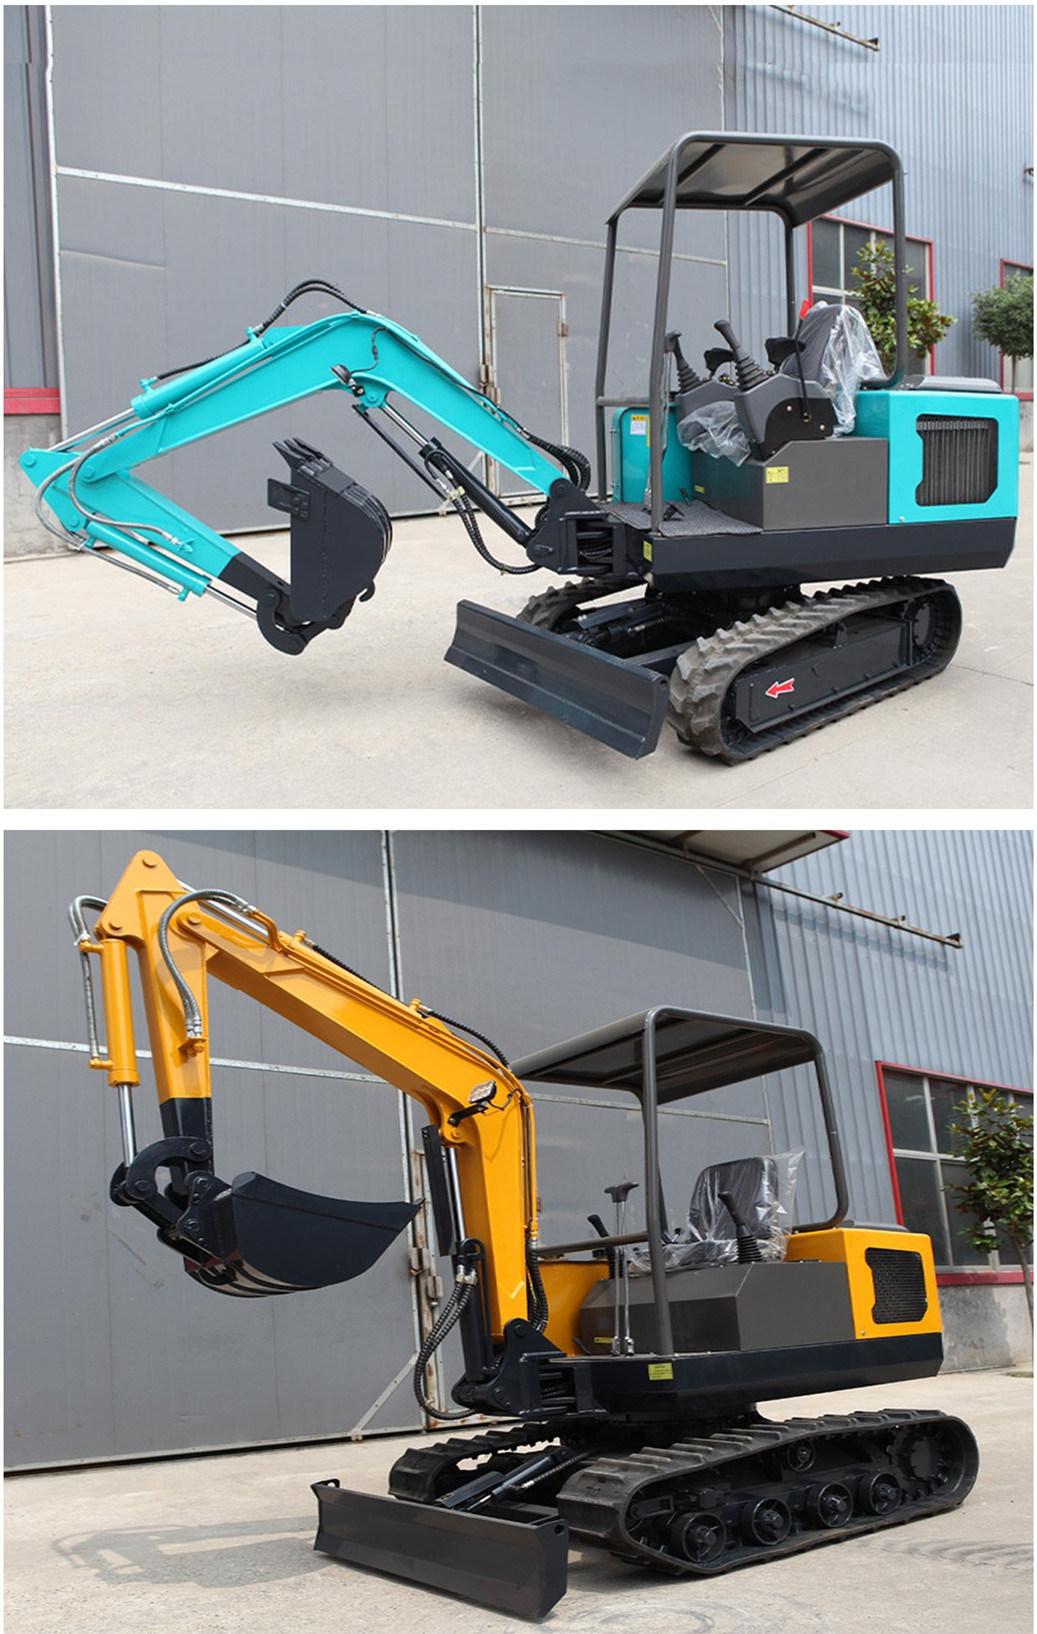 1000kg-3000kg China Hydraulic Mini Crawler Excavator Dumper with Competitive Prices